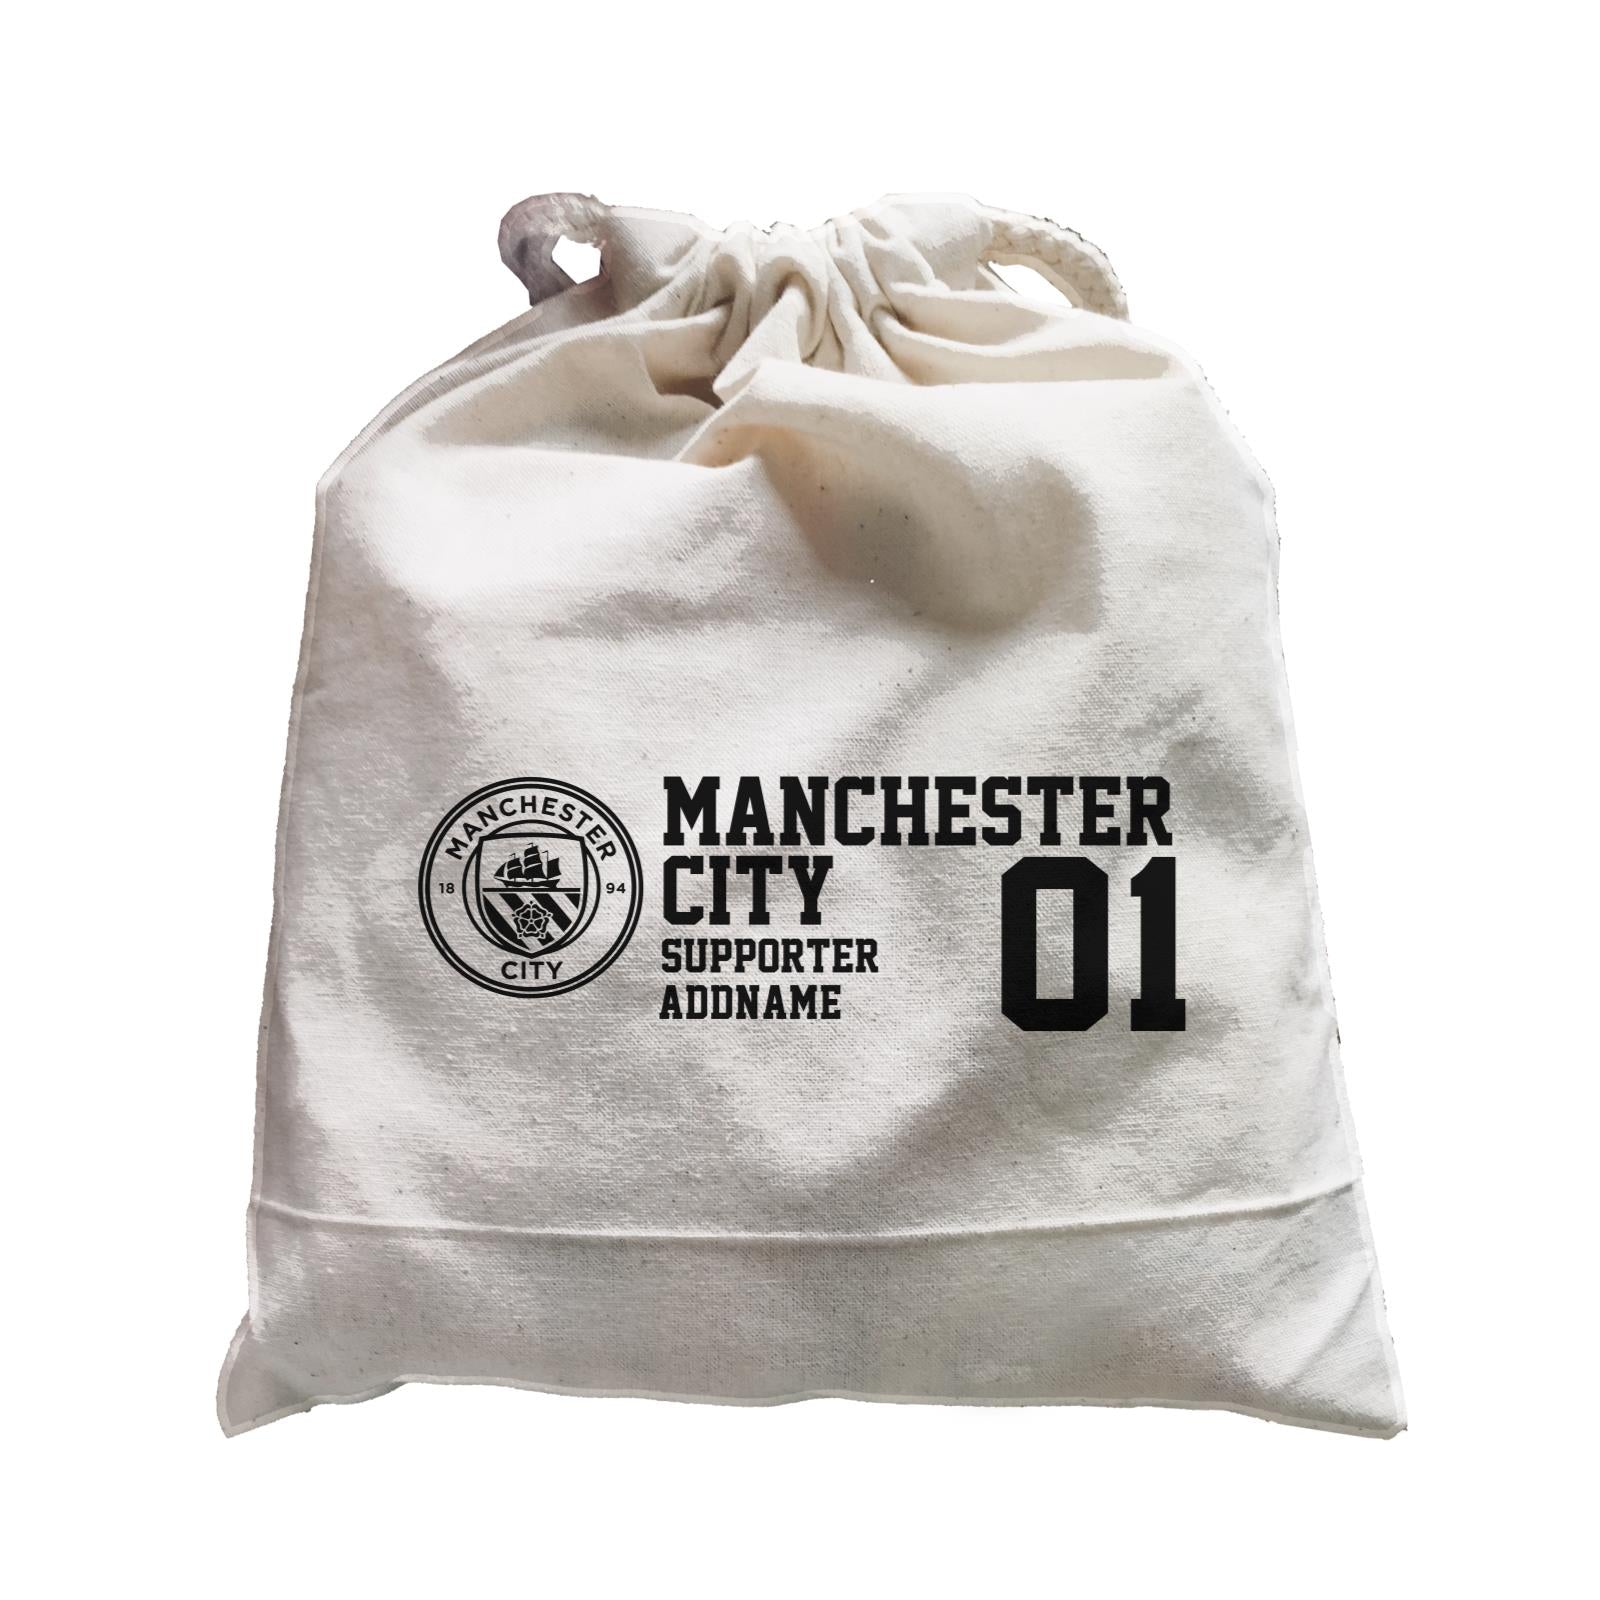 Manchester City Football Supporter Accessories Addname Satchel